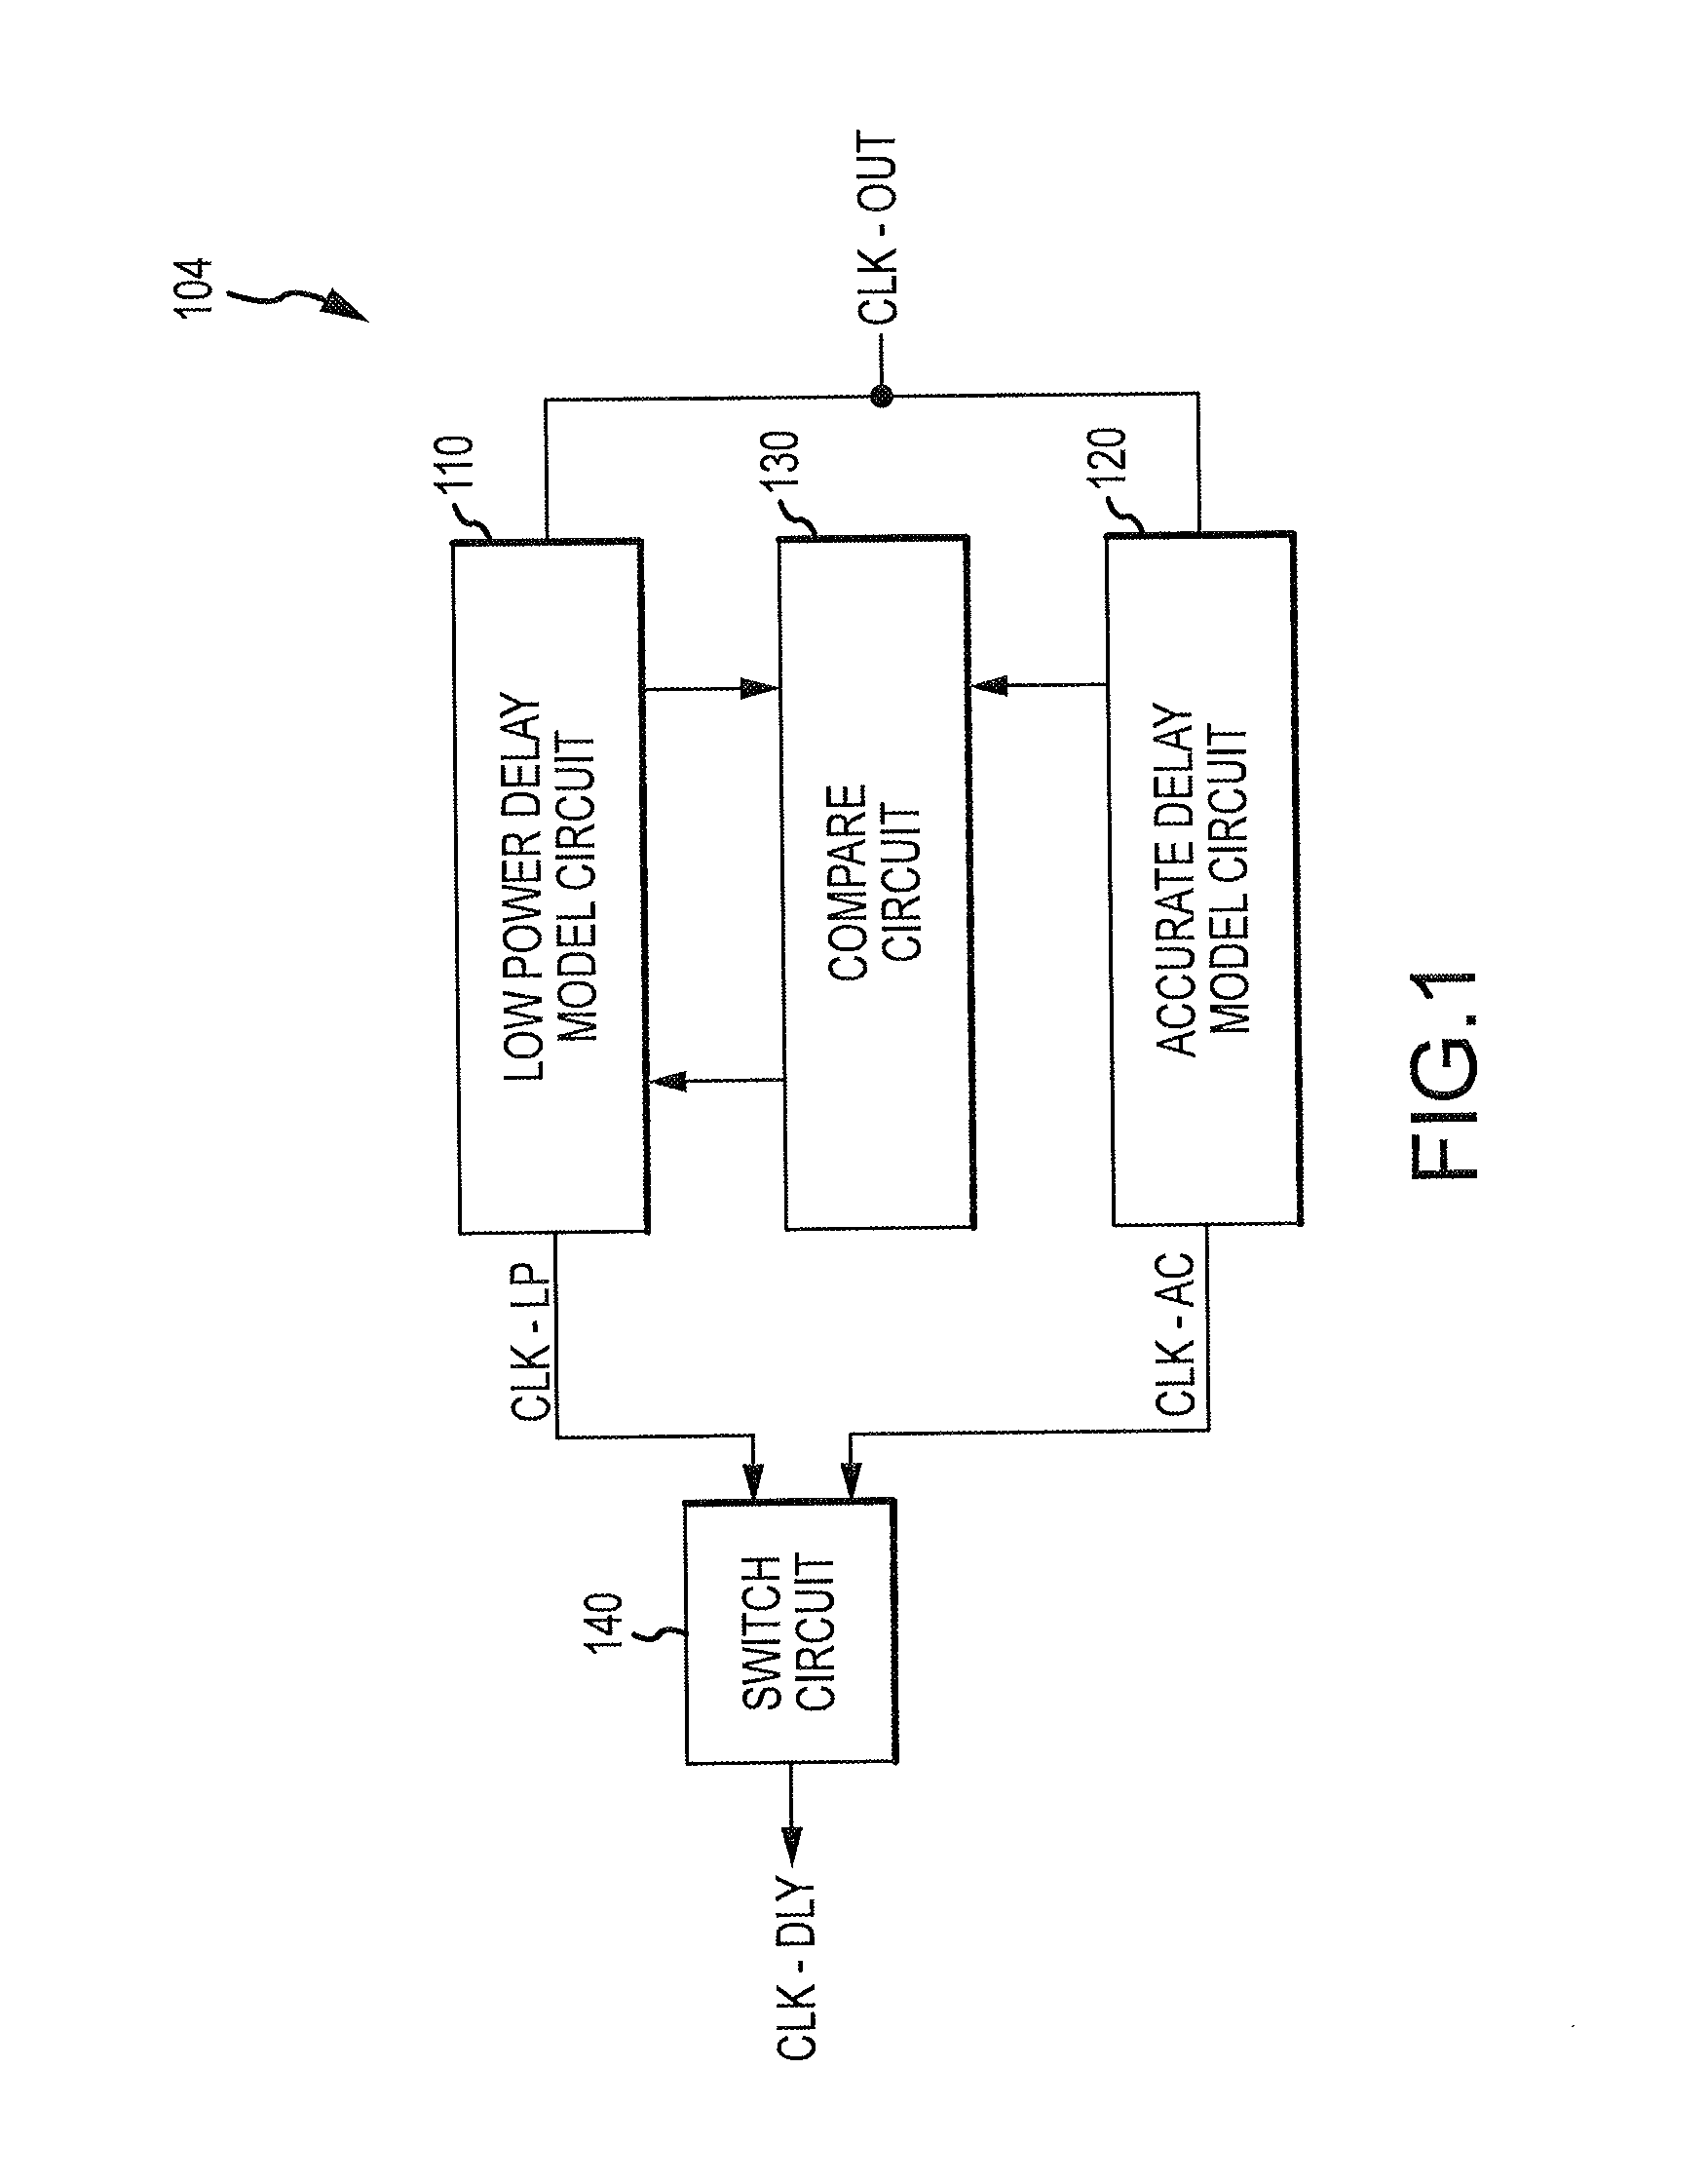 Circuits, apparatuses, and methods for delay models